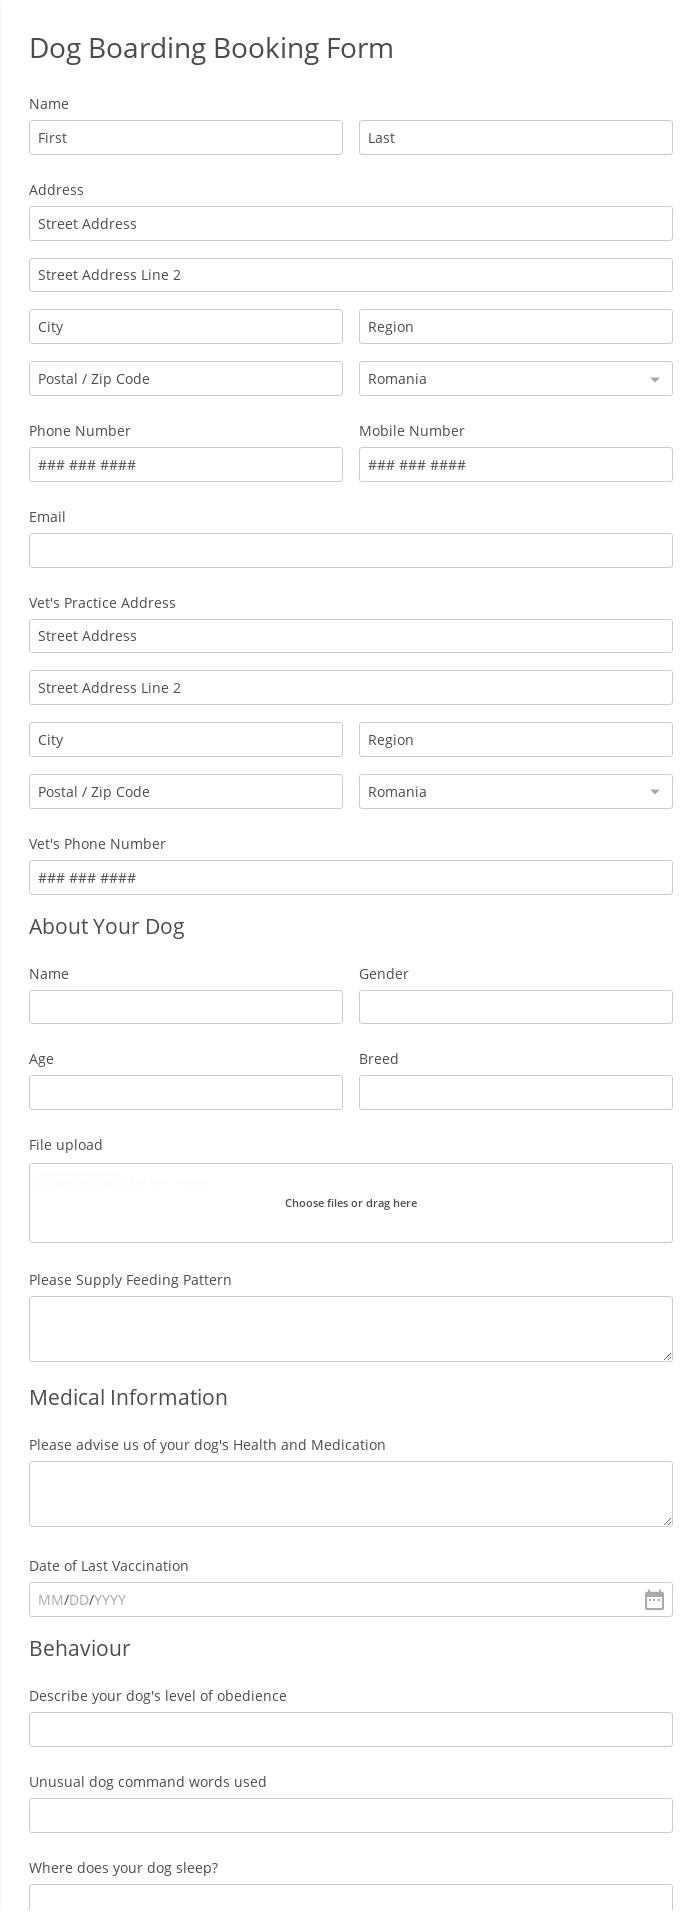 Dog Boarding Booking Form Template